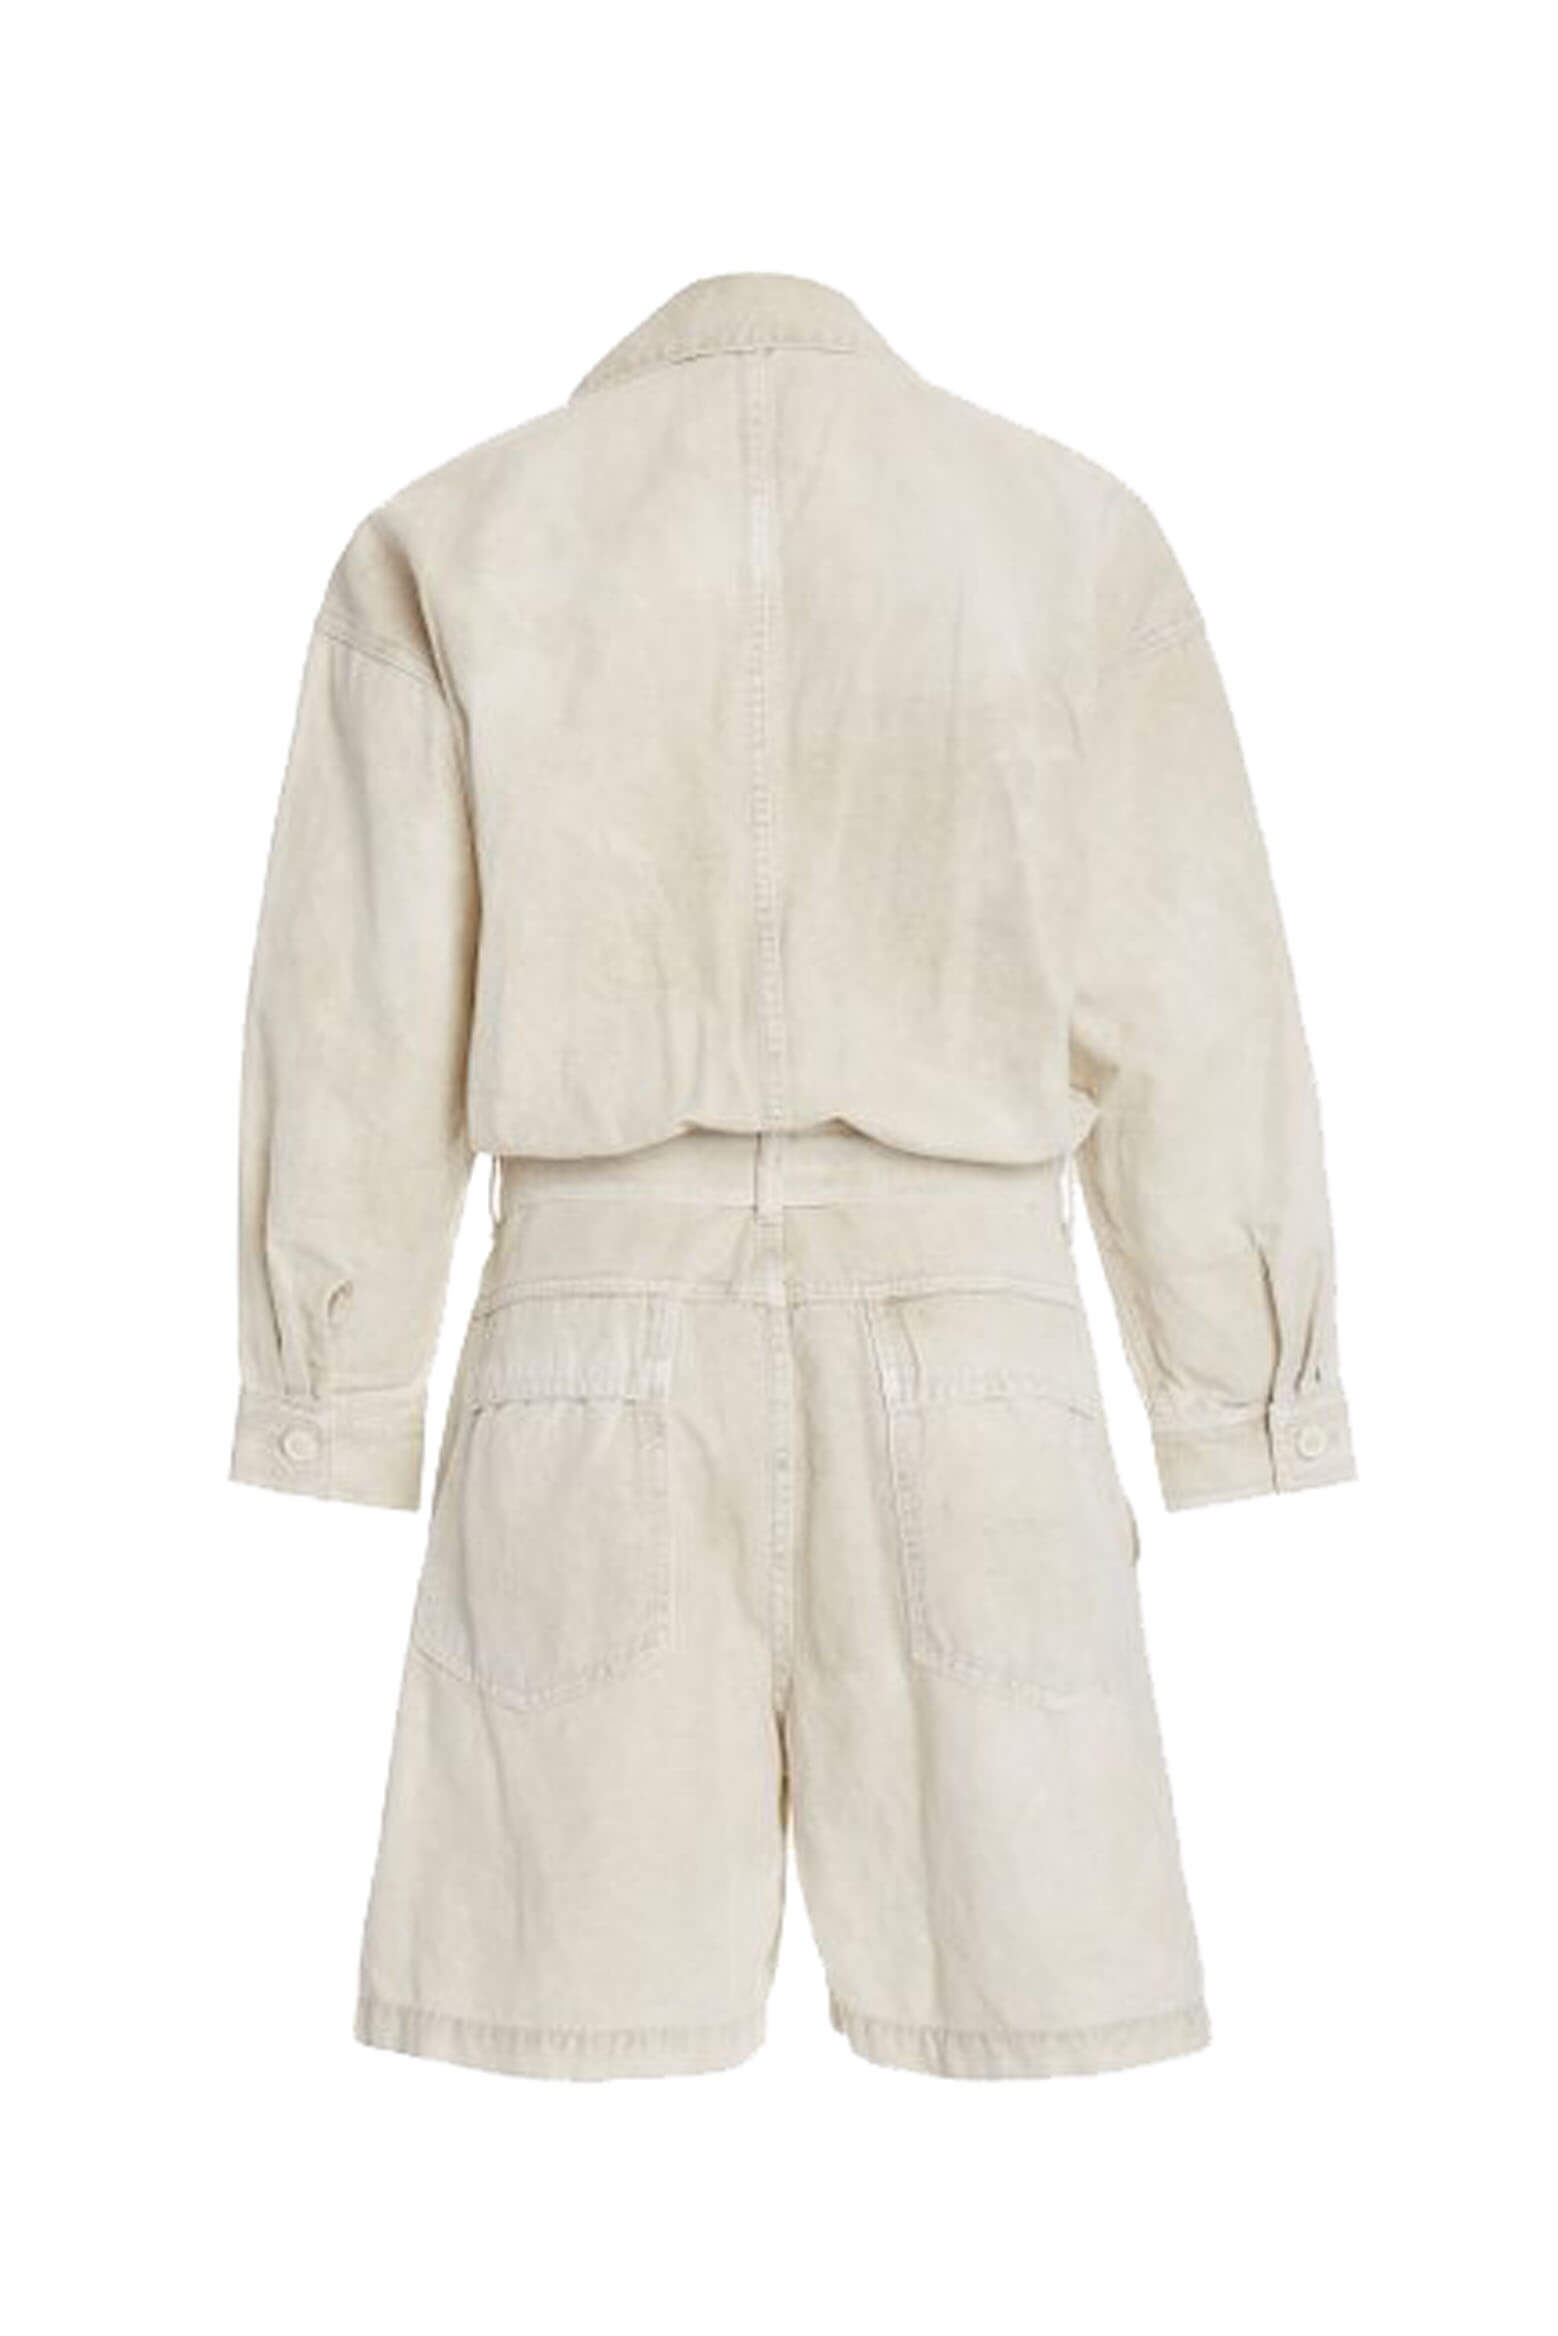 Citizens of Humanity Willa Utility Romper in Sand Castle from The New Trend